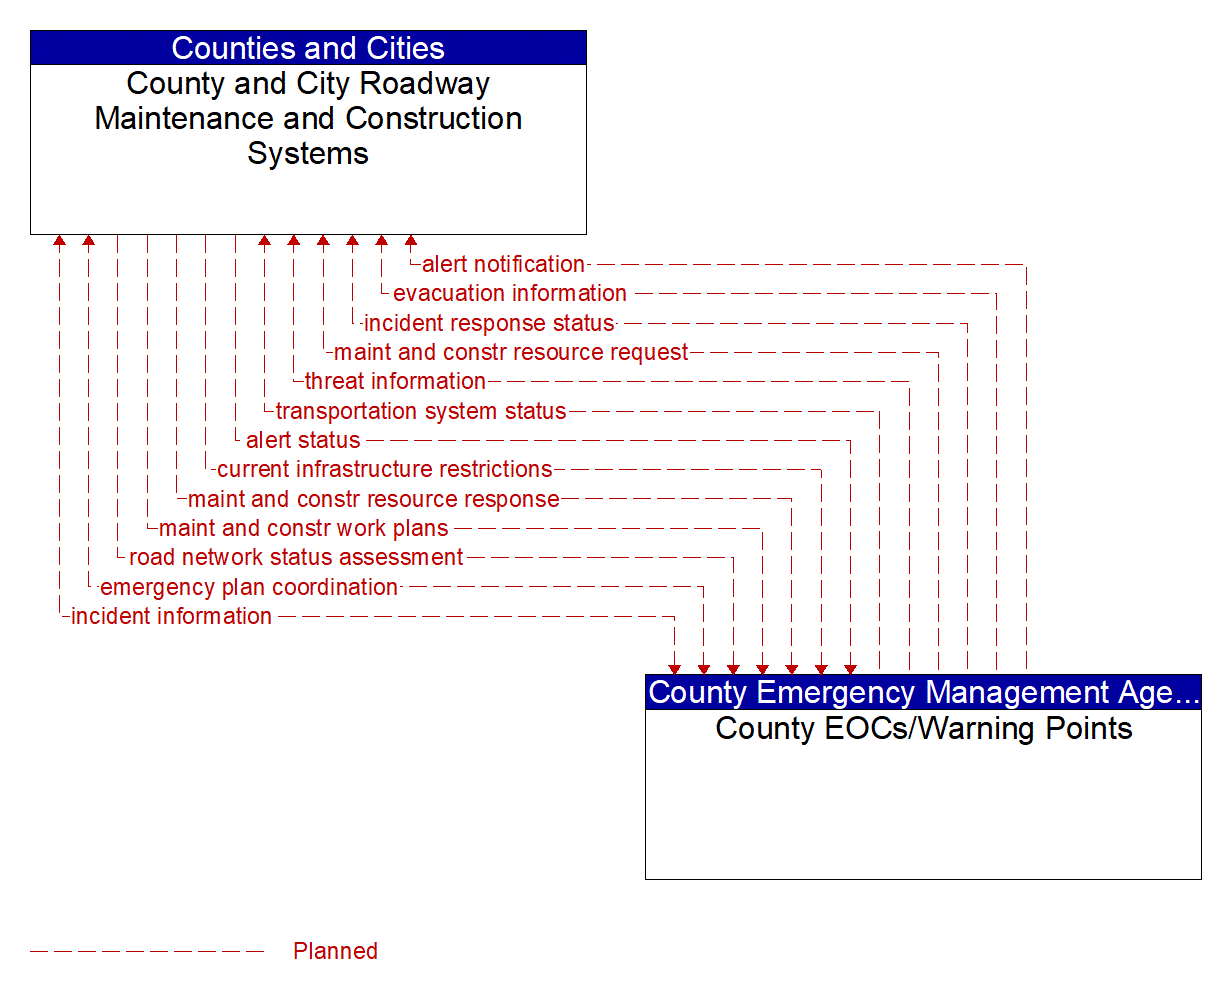 Architecture Flow Diagram: County EOCs/Warning Points <--> County and City Roadway Maintenance and Construction Systems